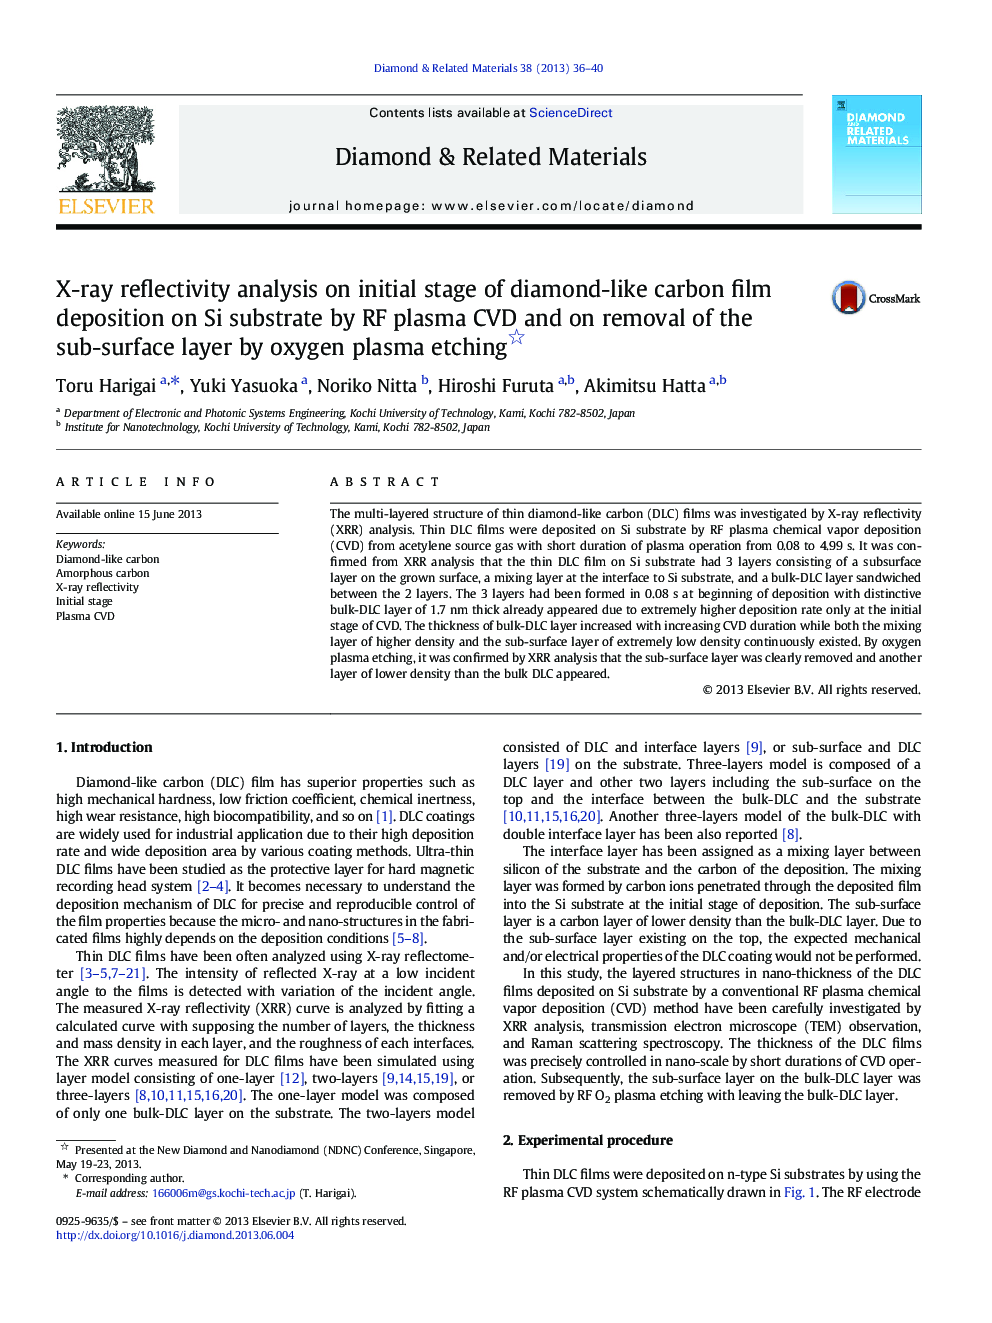 X-ray reflectivity analysis on initial stage of diamond-like carbon film deposition on Si substrate by RF plasma CVD and on removal of the sub-surface layer by oxygen plasma etching